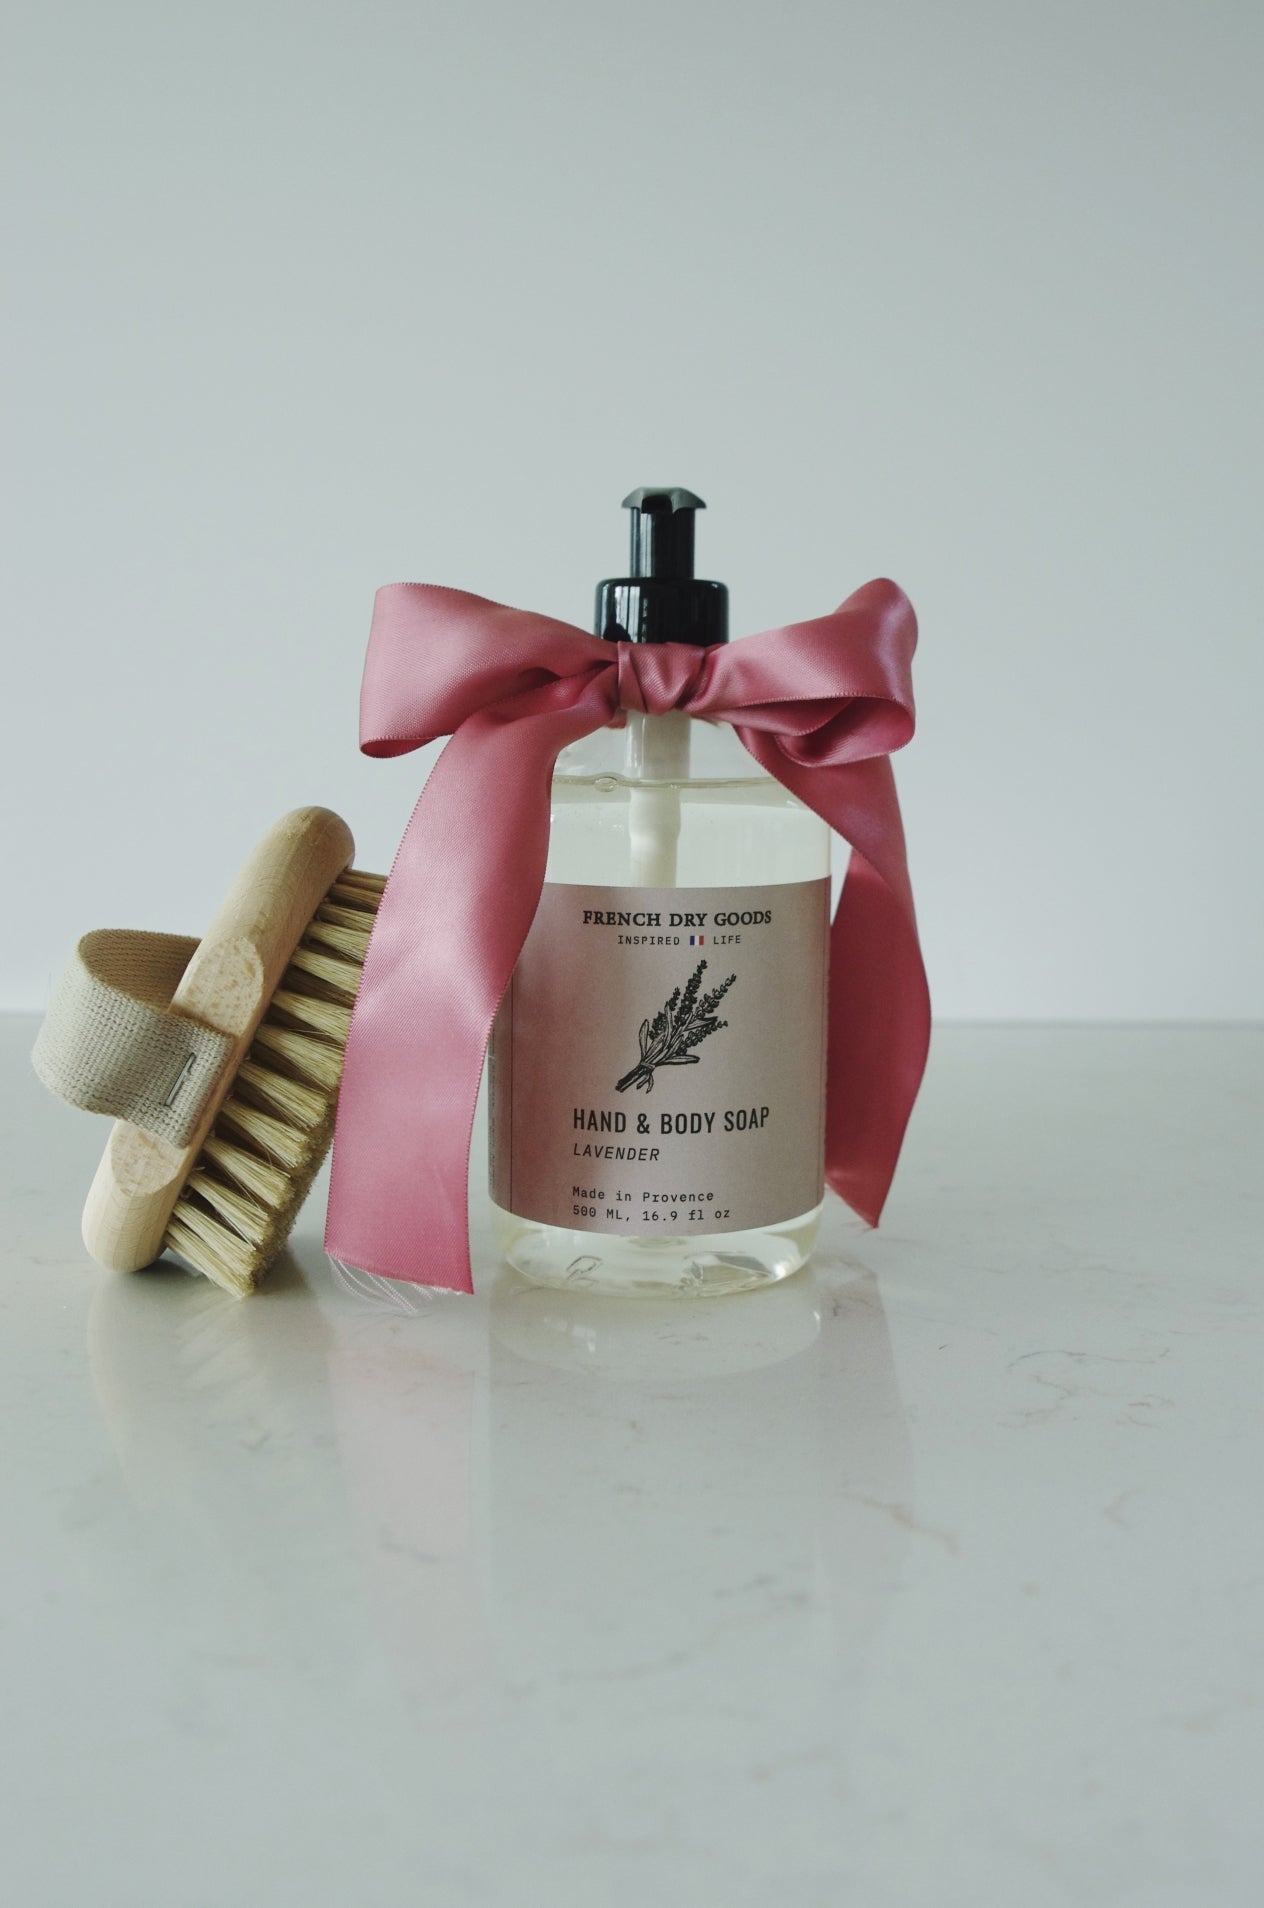 Liquid hand and body soap pump bottle labeled "Lavender", tied with a pink satin ribbon, next to a wooden nail brush.